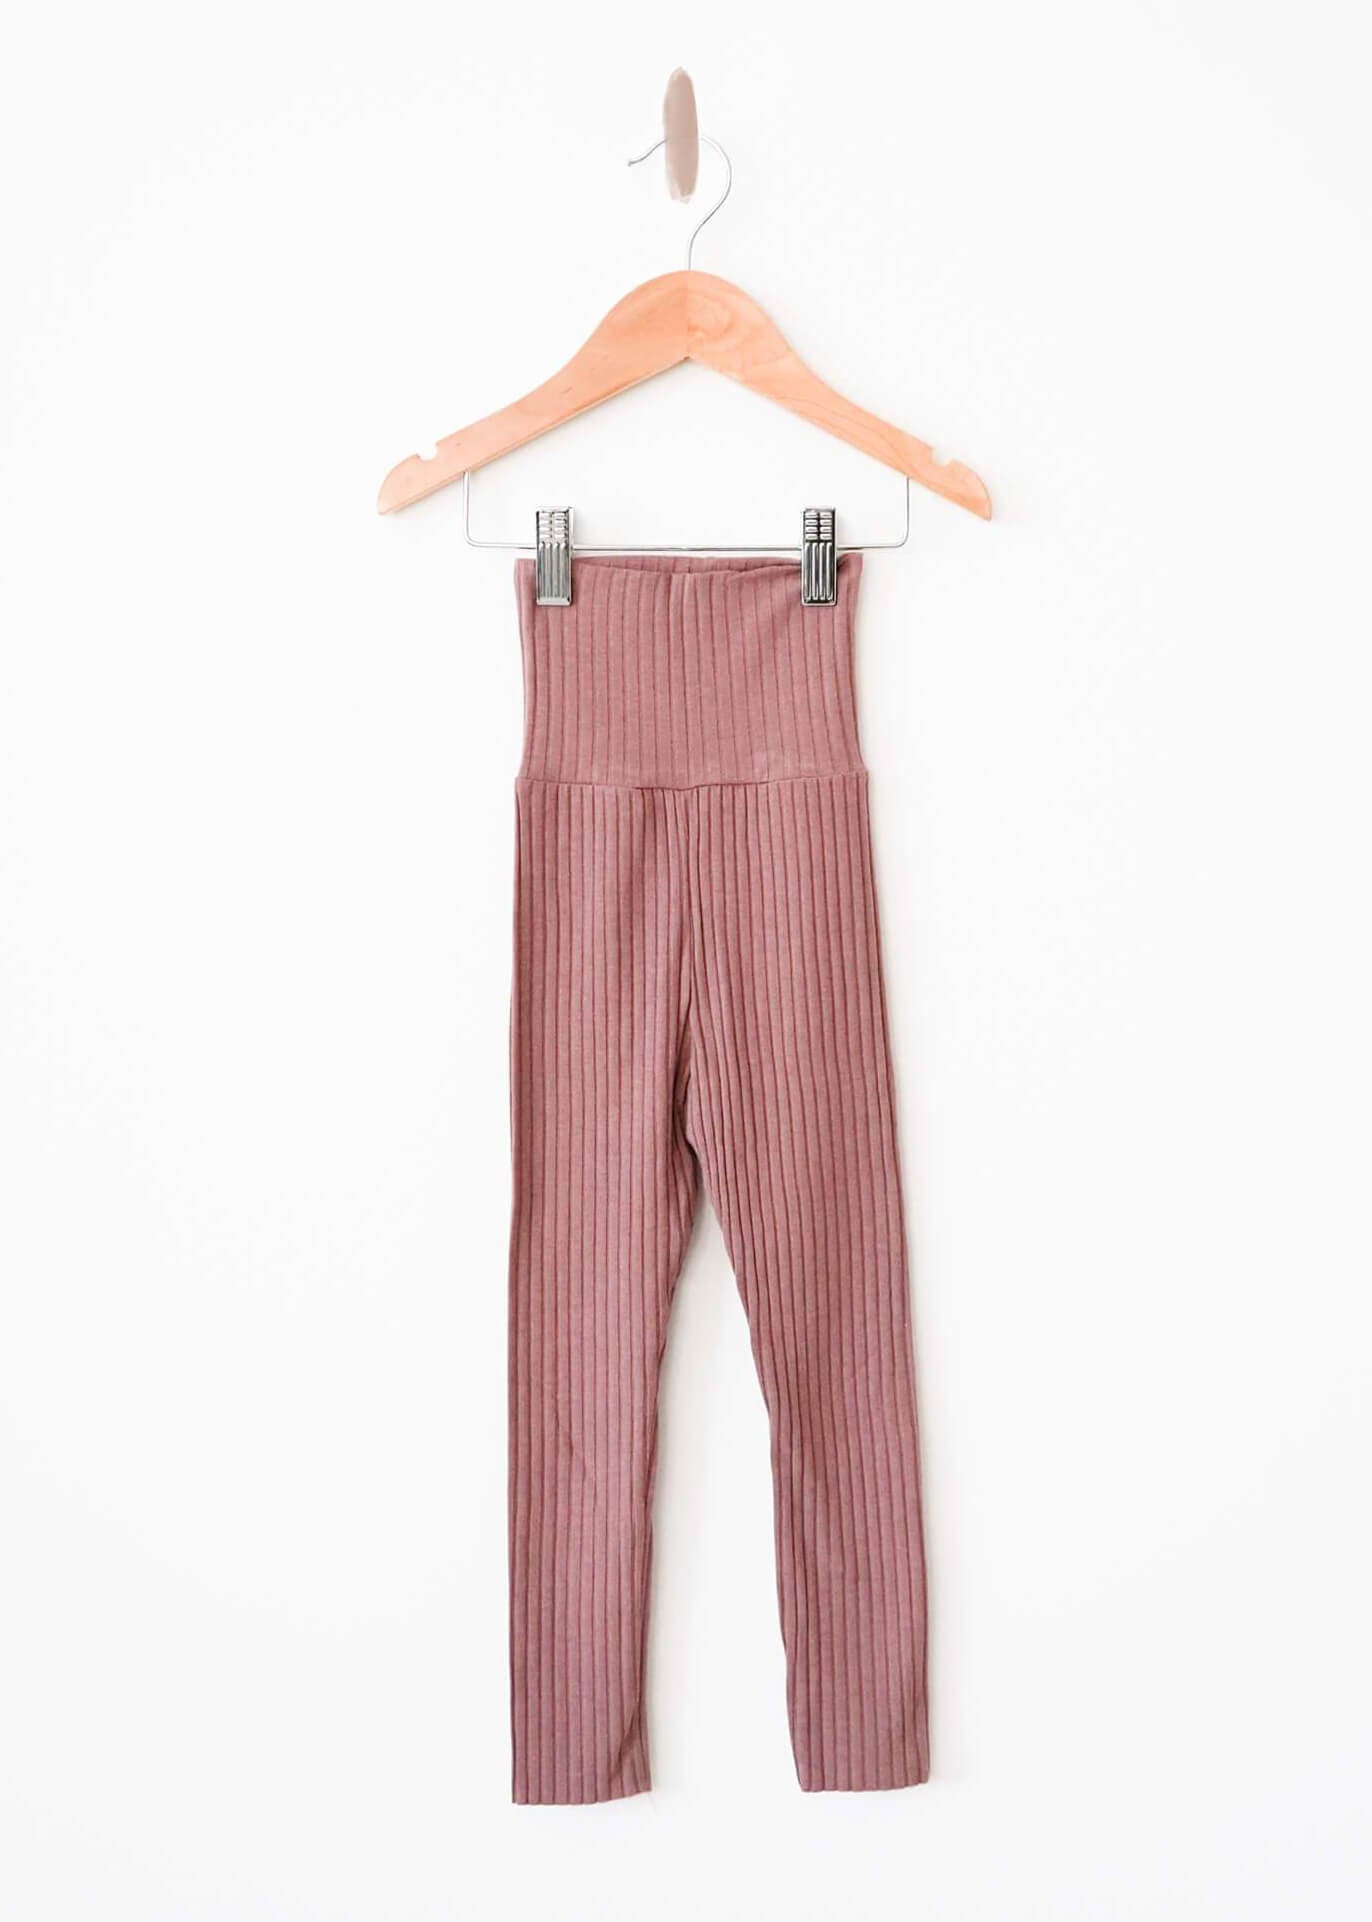 ROBIN Top + High Waisted Leggings Set - Mulberry - Rocco & The Fox